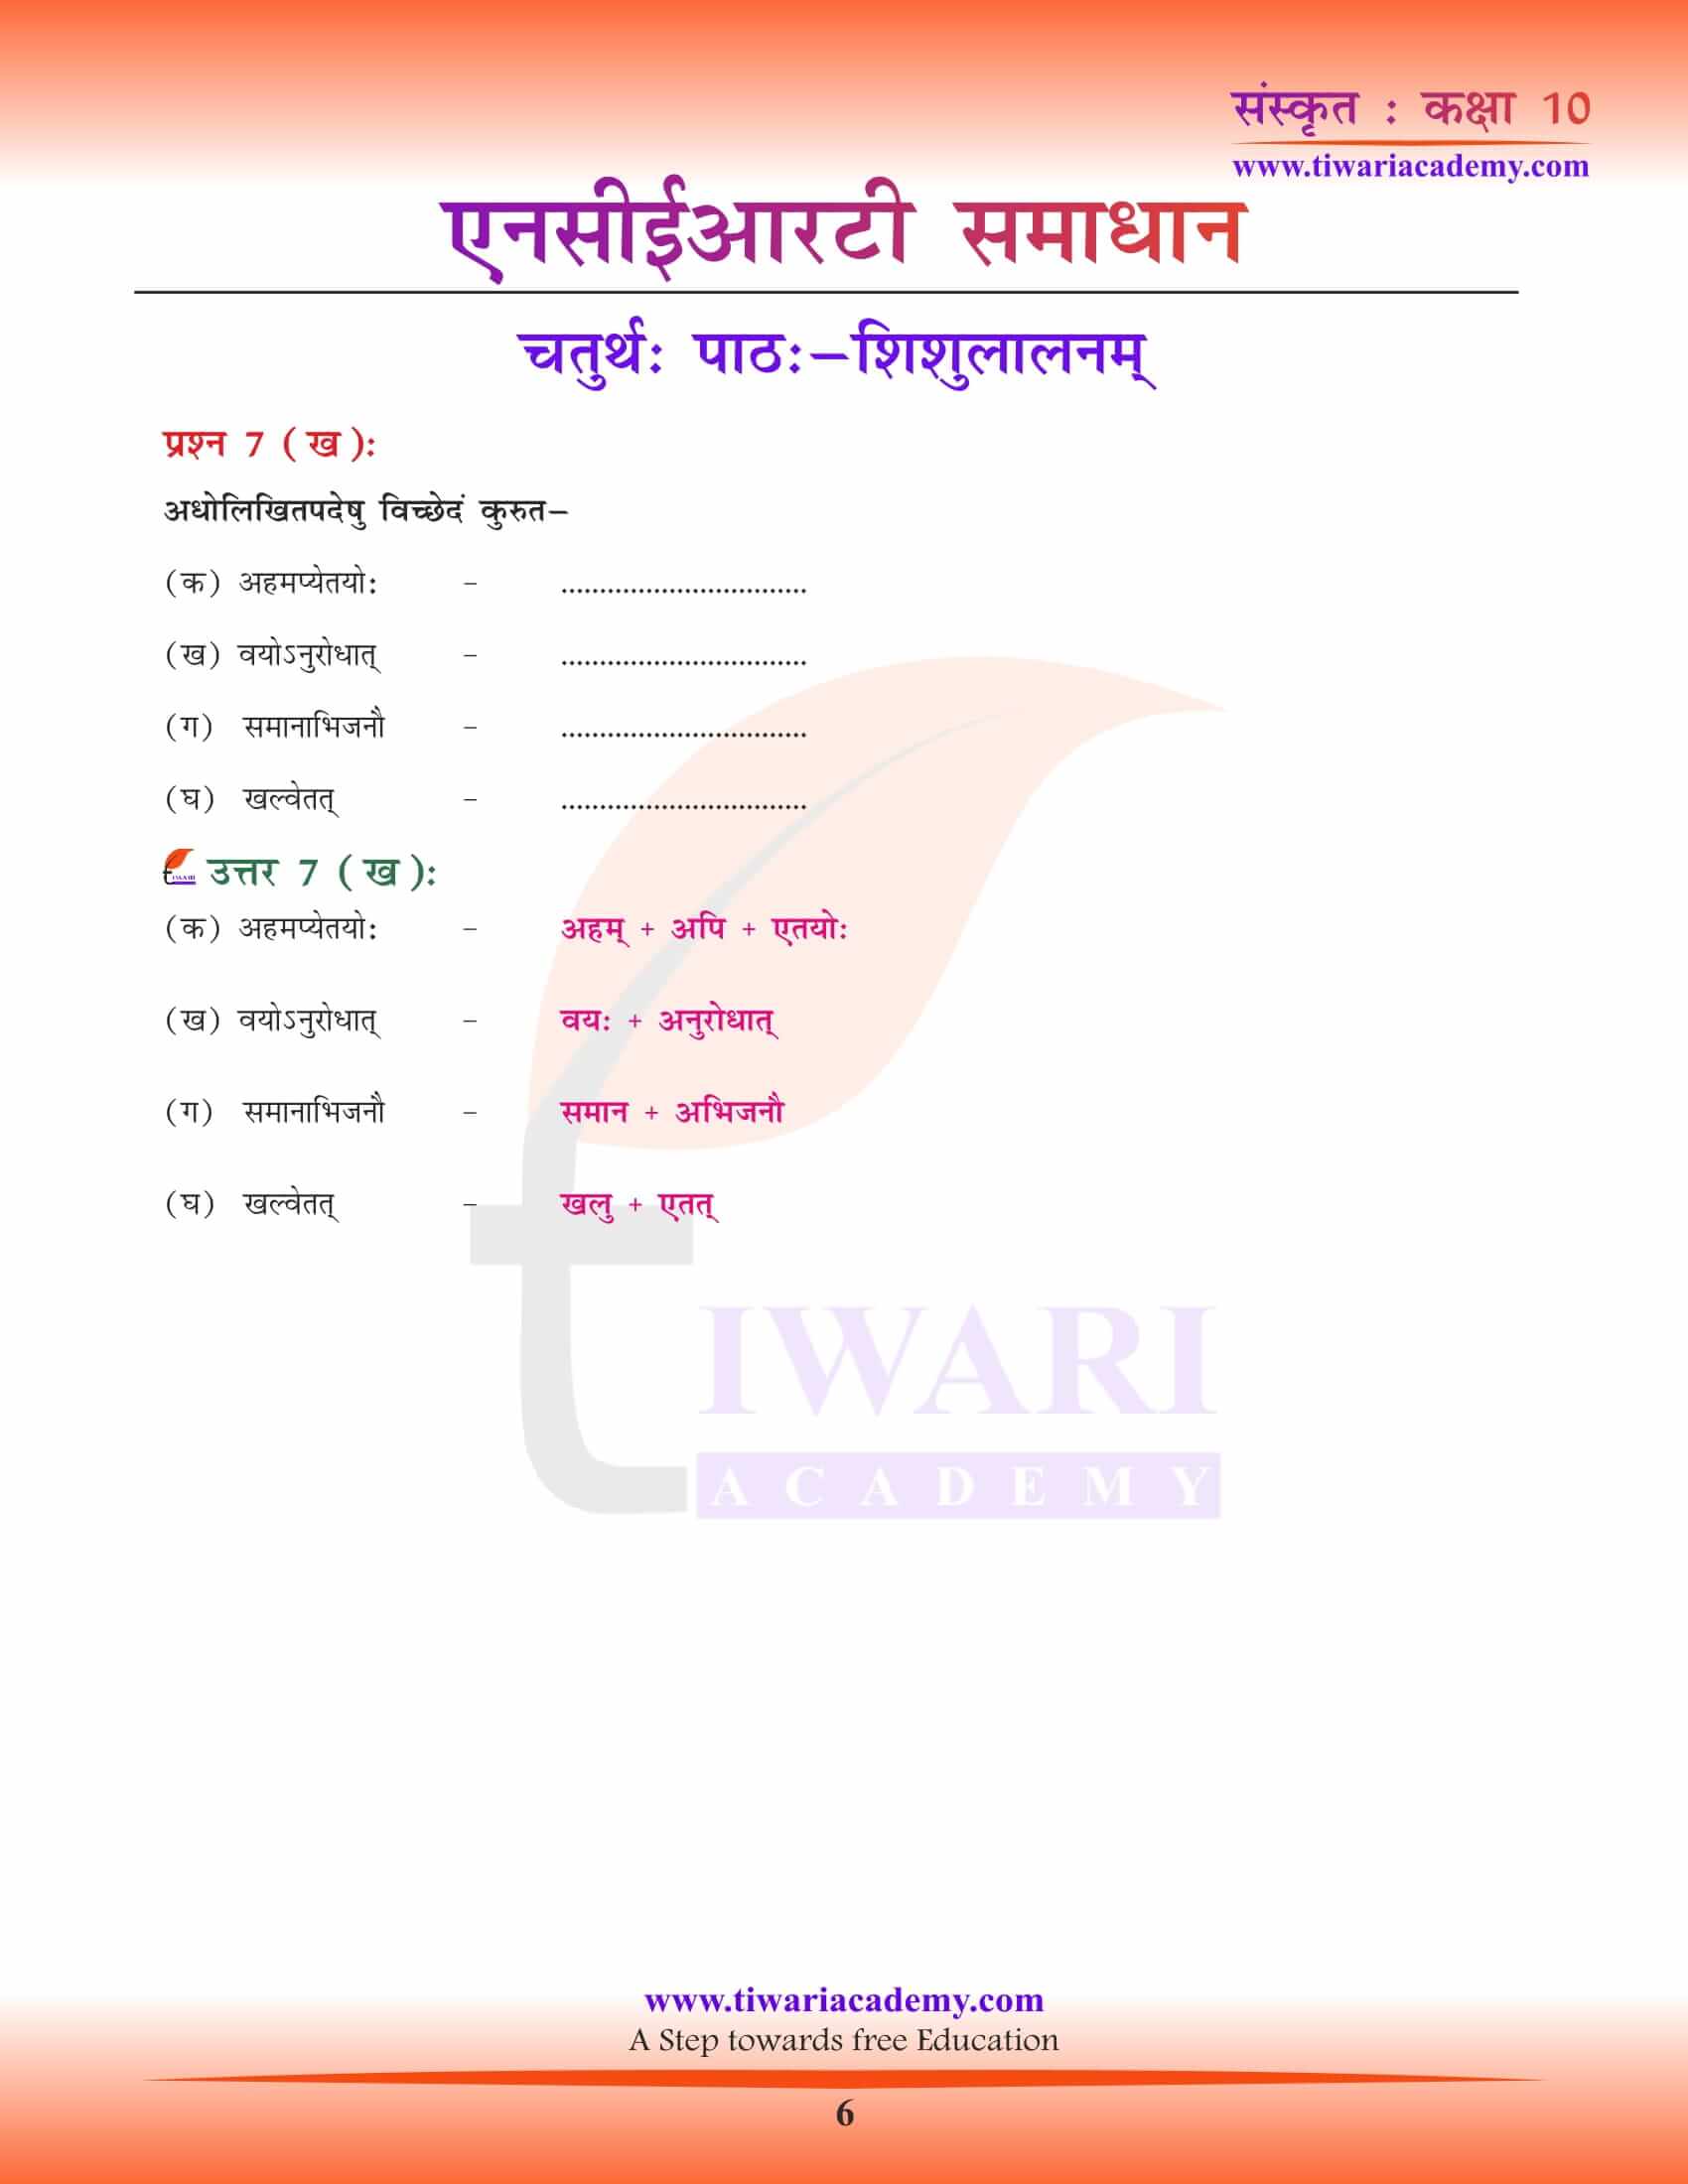 NCERT Solutions for Class 10 Sanskrit Chapter 4 all question answers